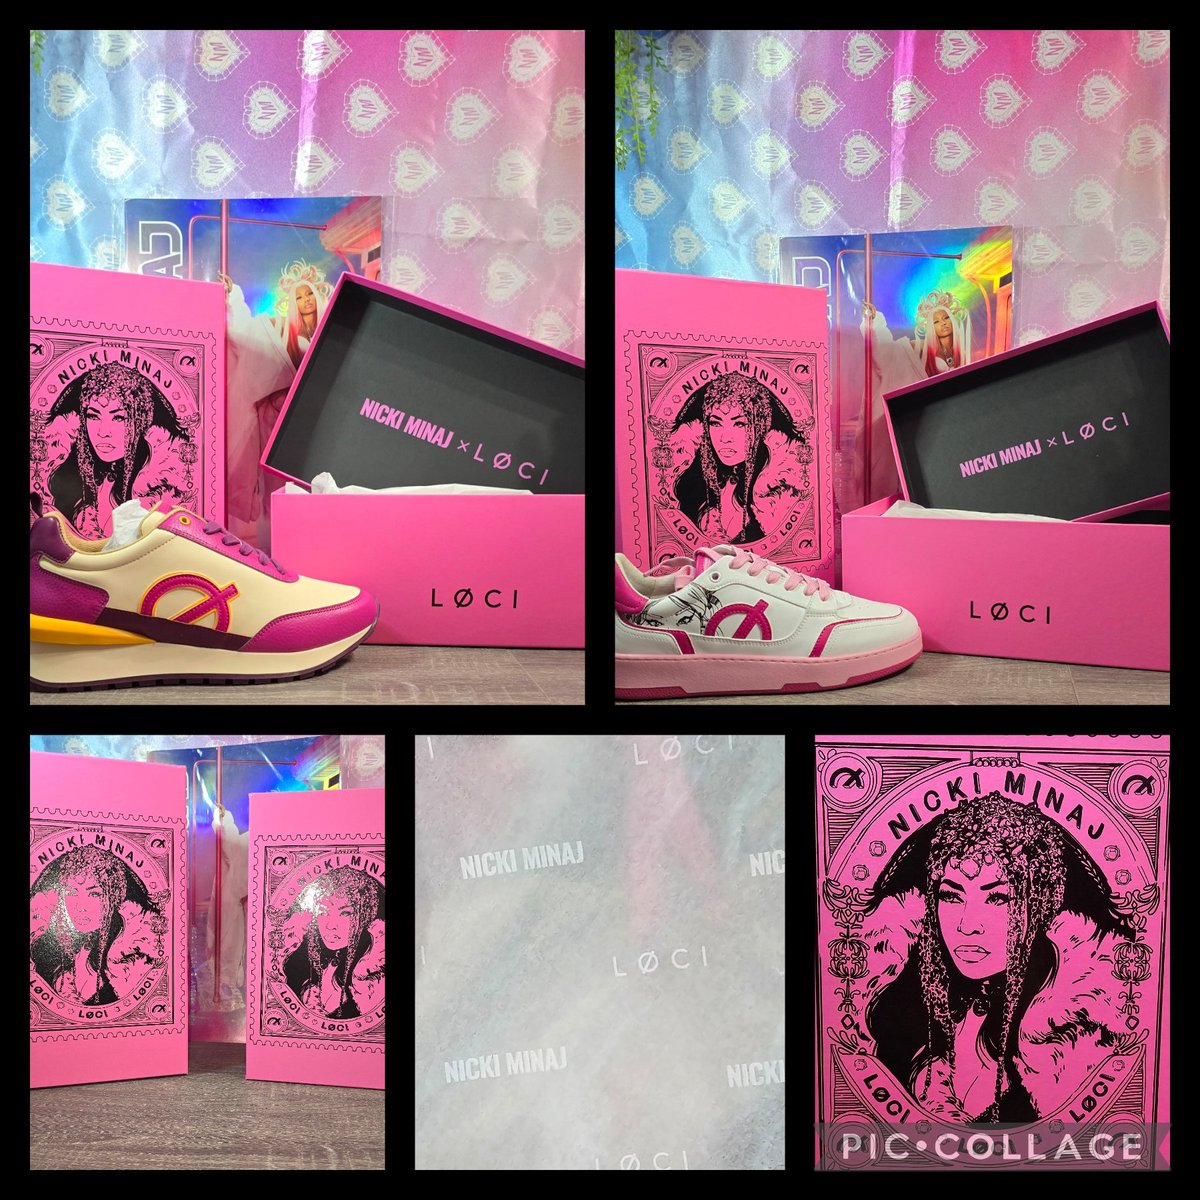 These beauties got here today!!!!! They're perfect! Thank you @NickiMinaj and @lociwear Happy #PinkFriday